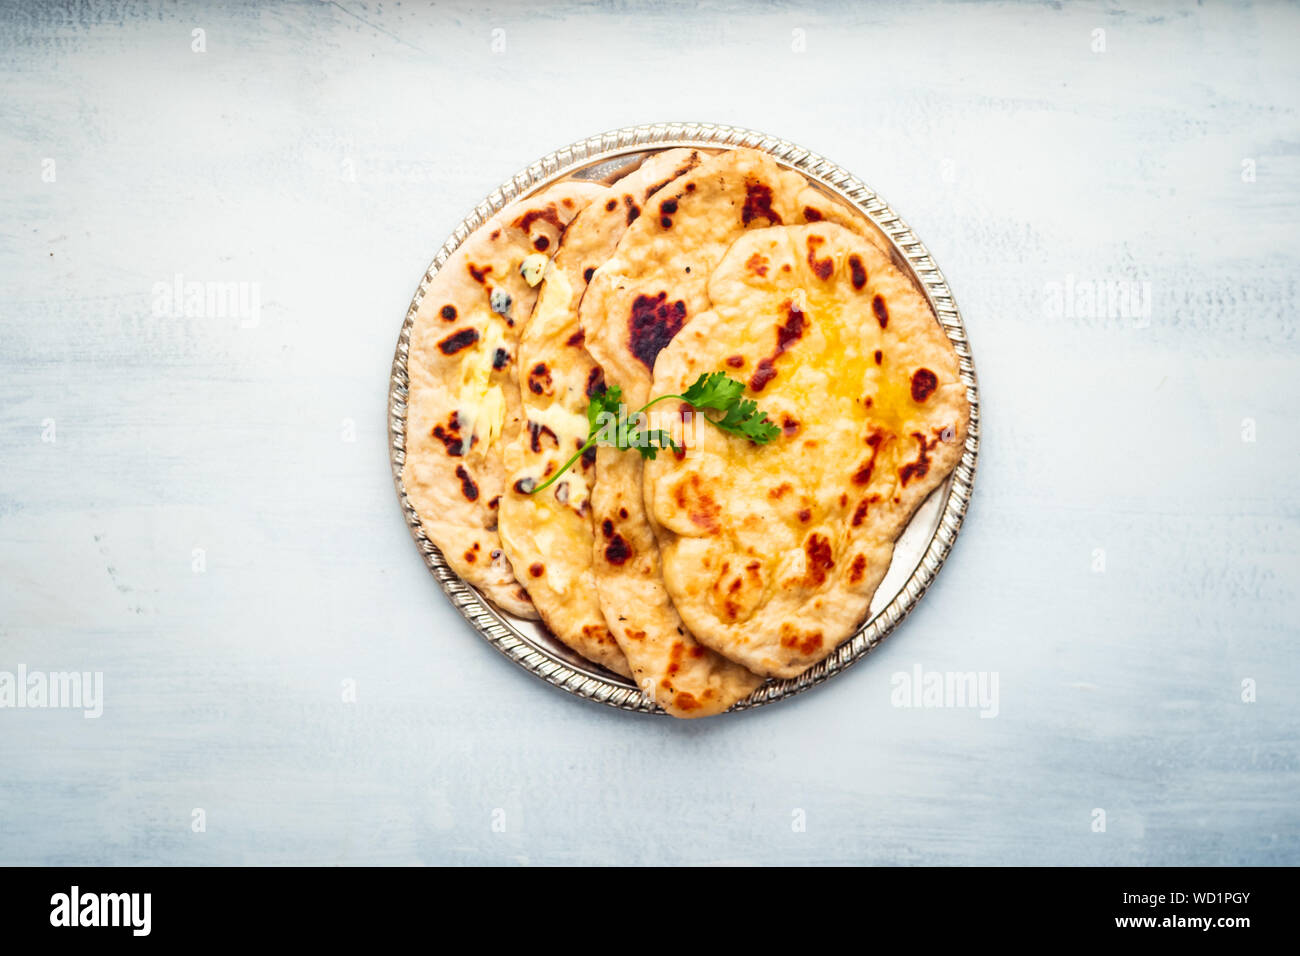 Indian Food: Naan Bread Dish with Butter and Cilantro Leaf, Served on a Rustic Metal Tray Stock Photo